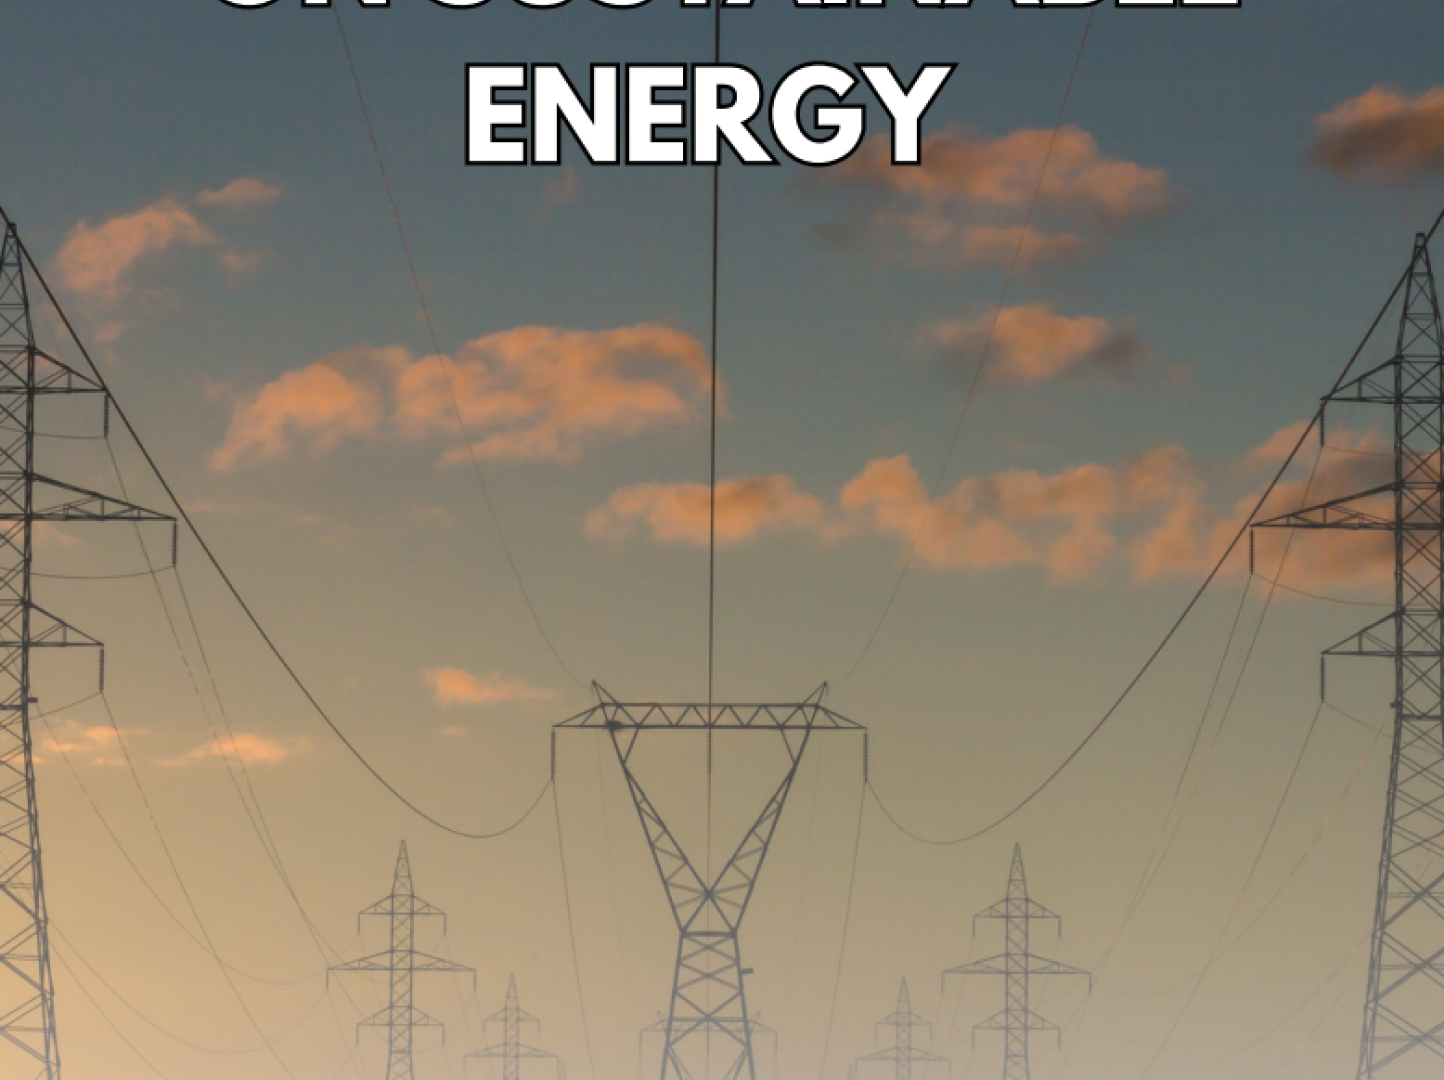 One UN Strategy on Sustainable Energy